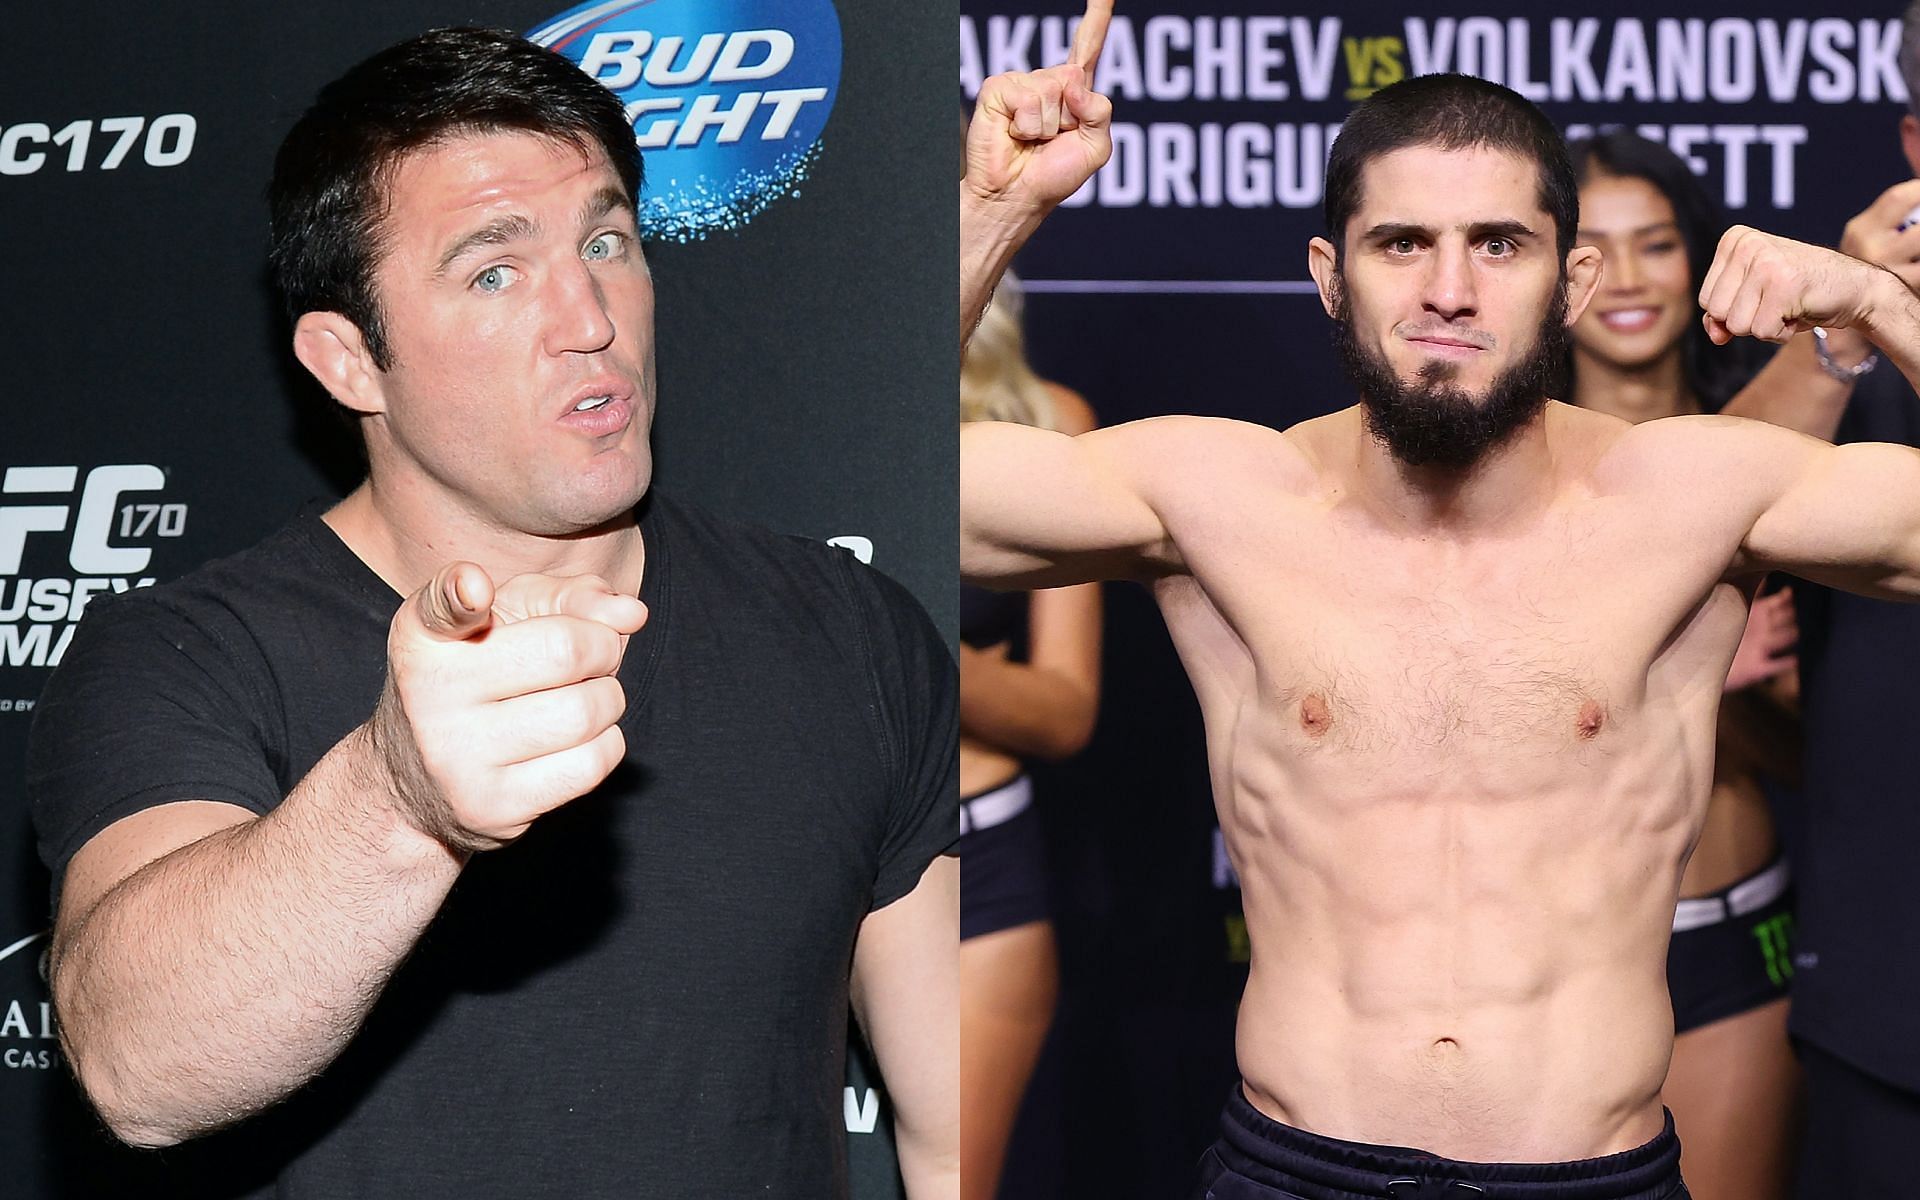 Chael Sonnen (left) and Islam Makhachev (right) [Image credits: Getty Images] 